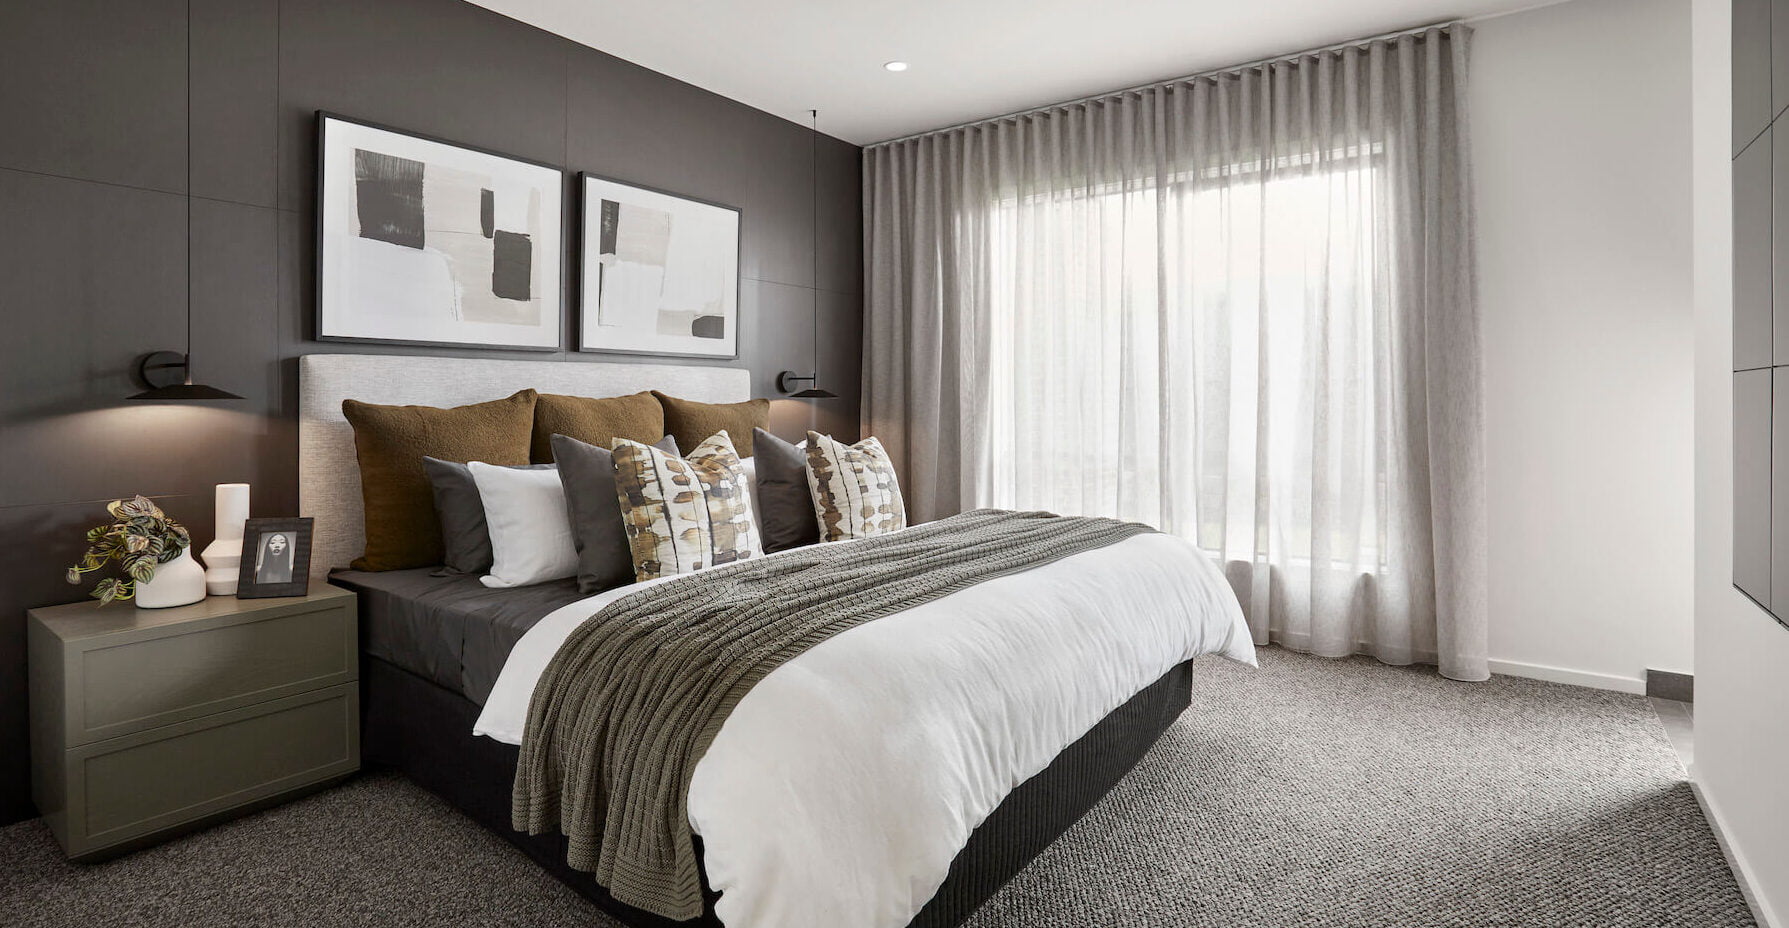 Top 5 tips to create a luxurious Master Bedroom